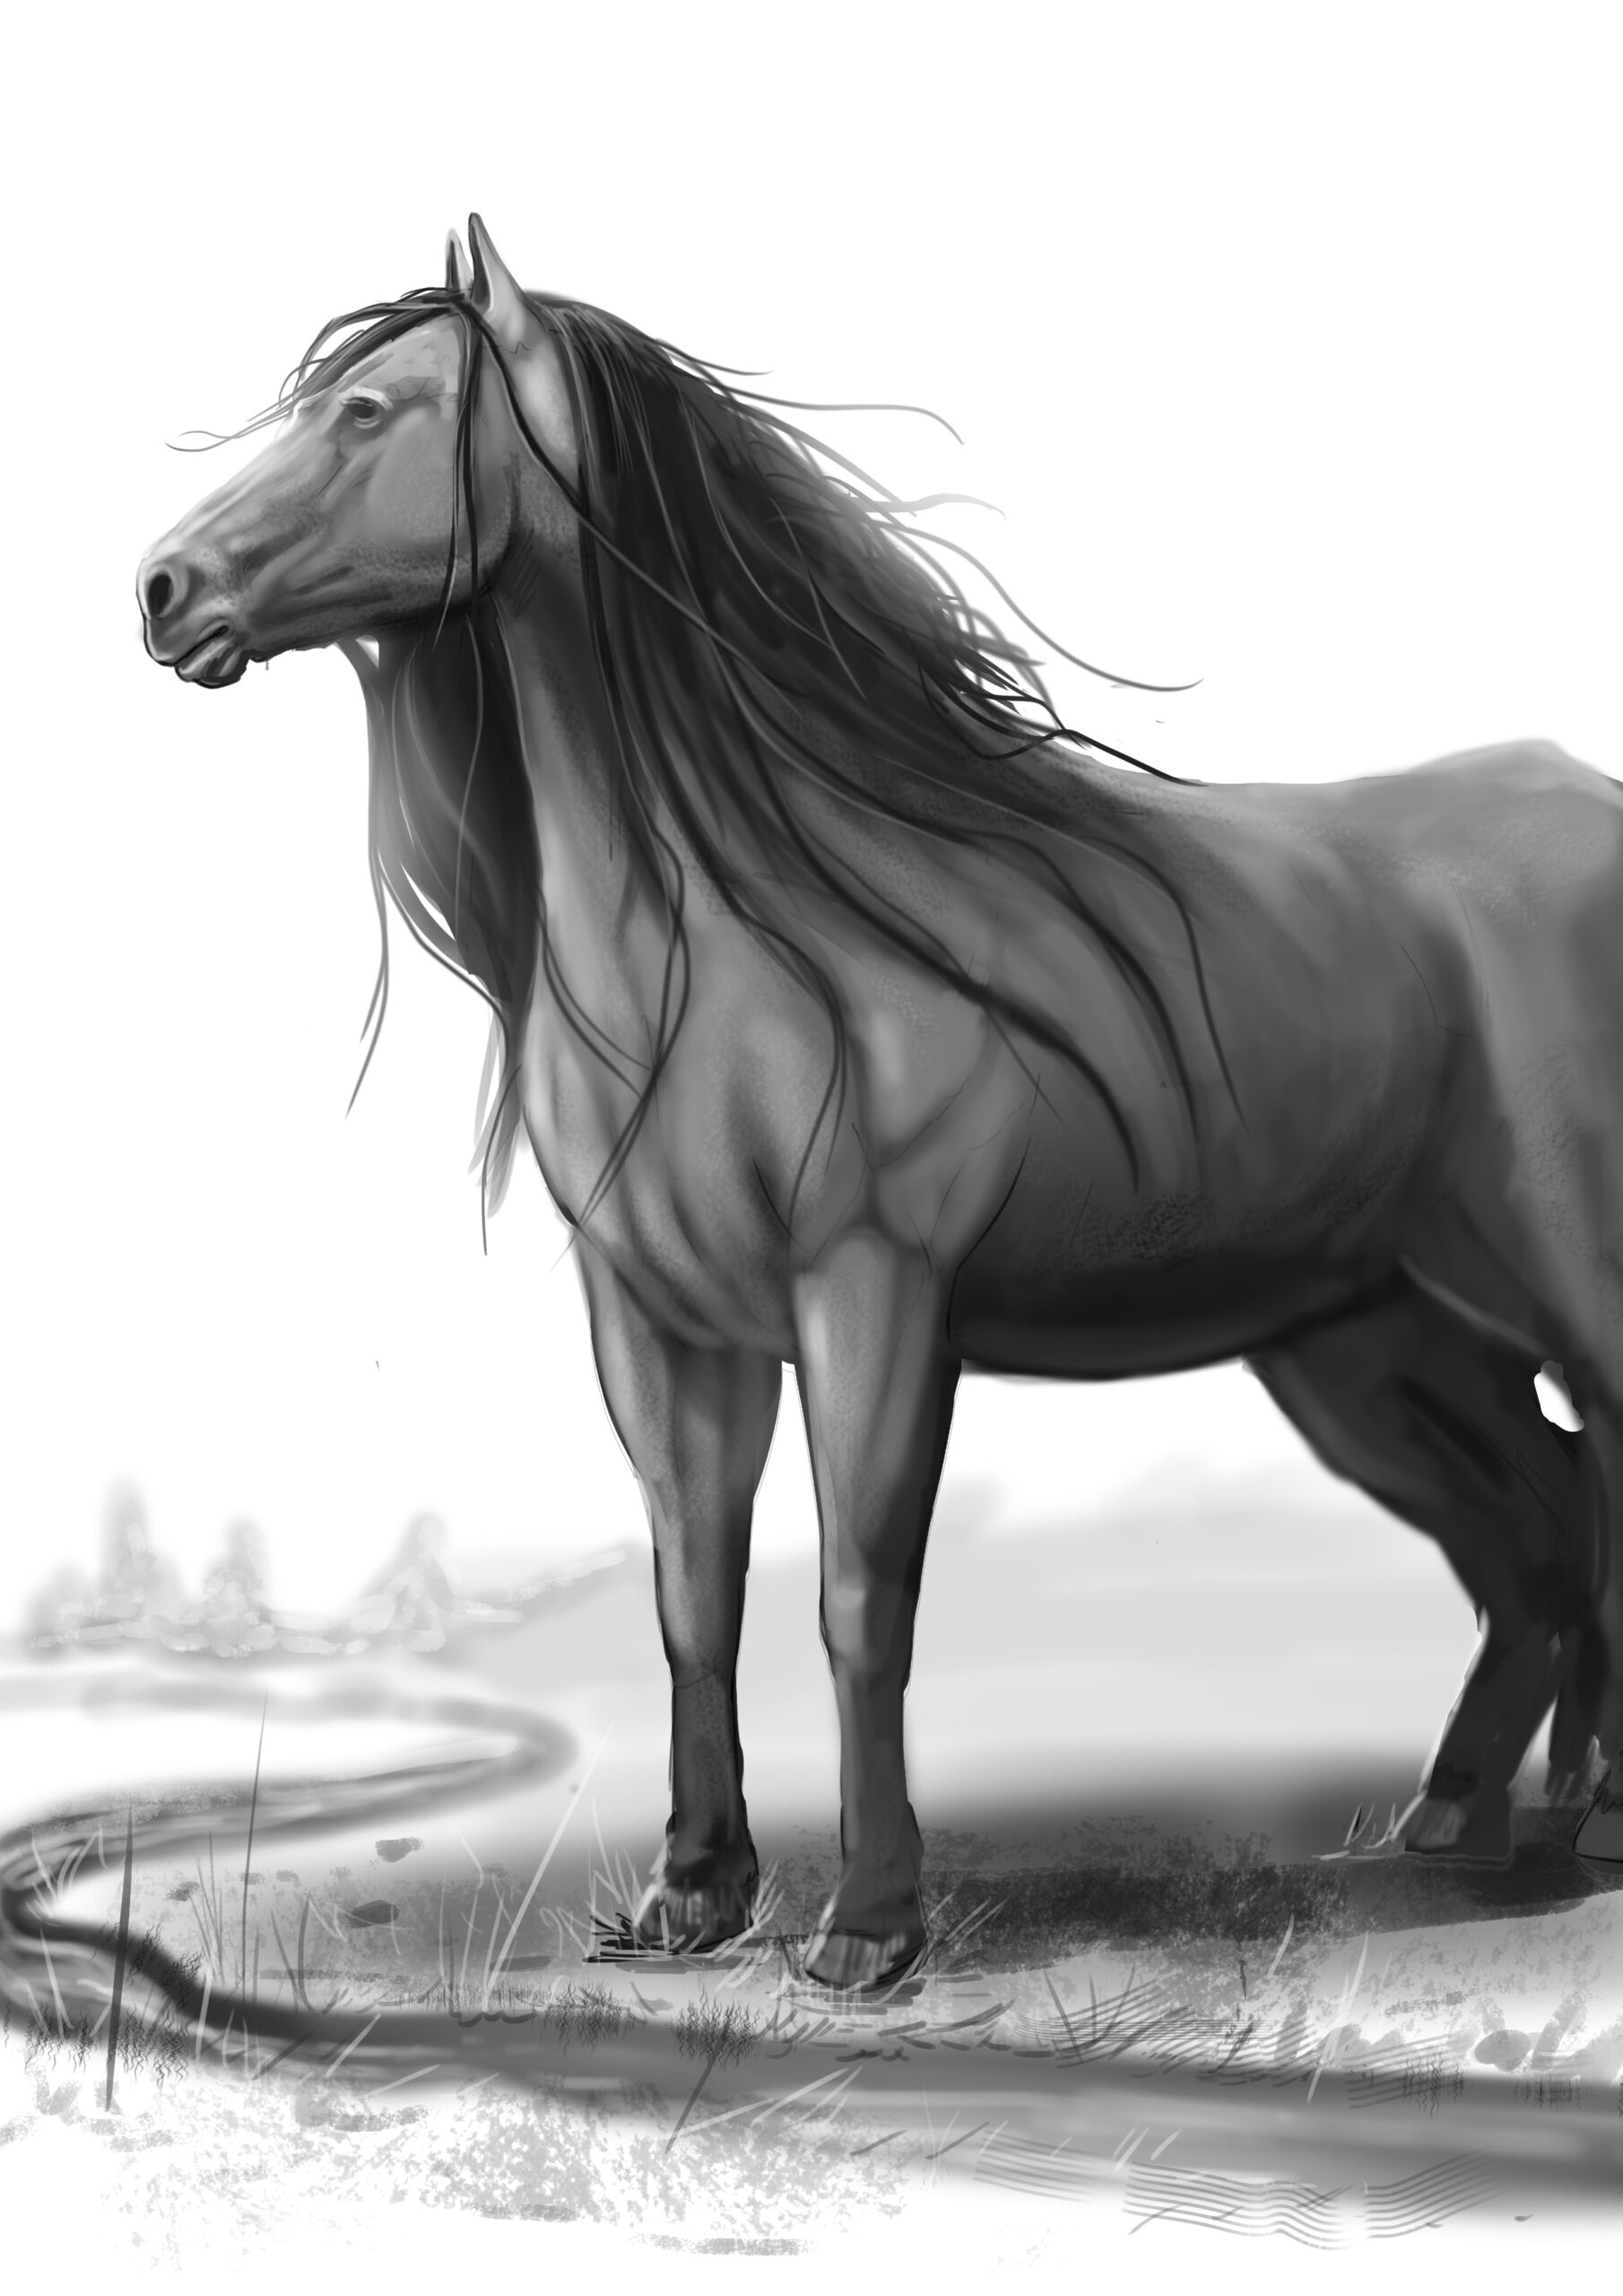 Intelligent  but wild species of fantasy horse. Fantasy fauna illustration for Lance Vangundy, by The Noble Artist